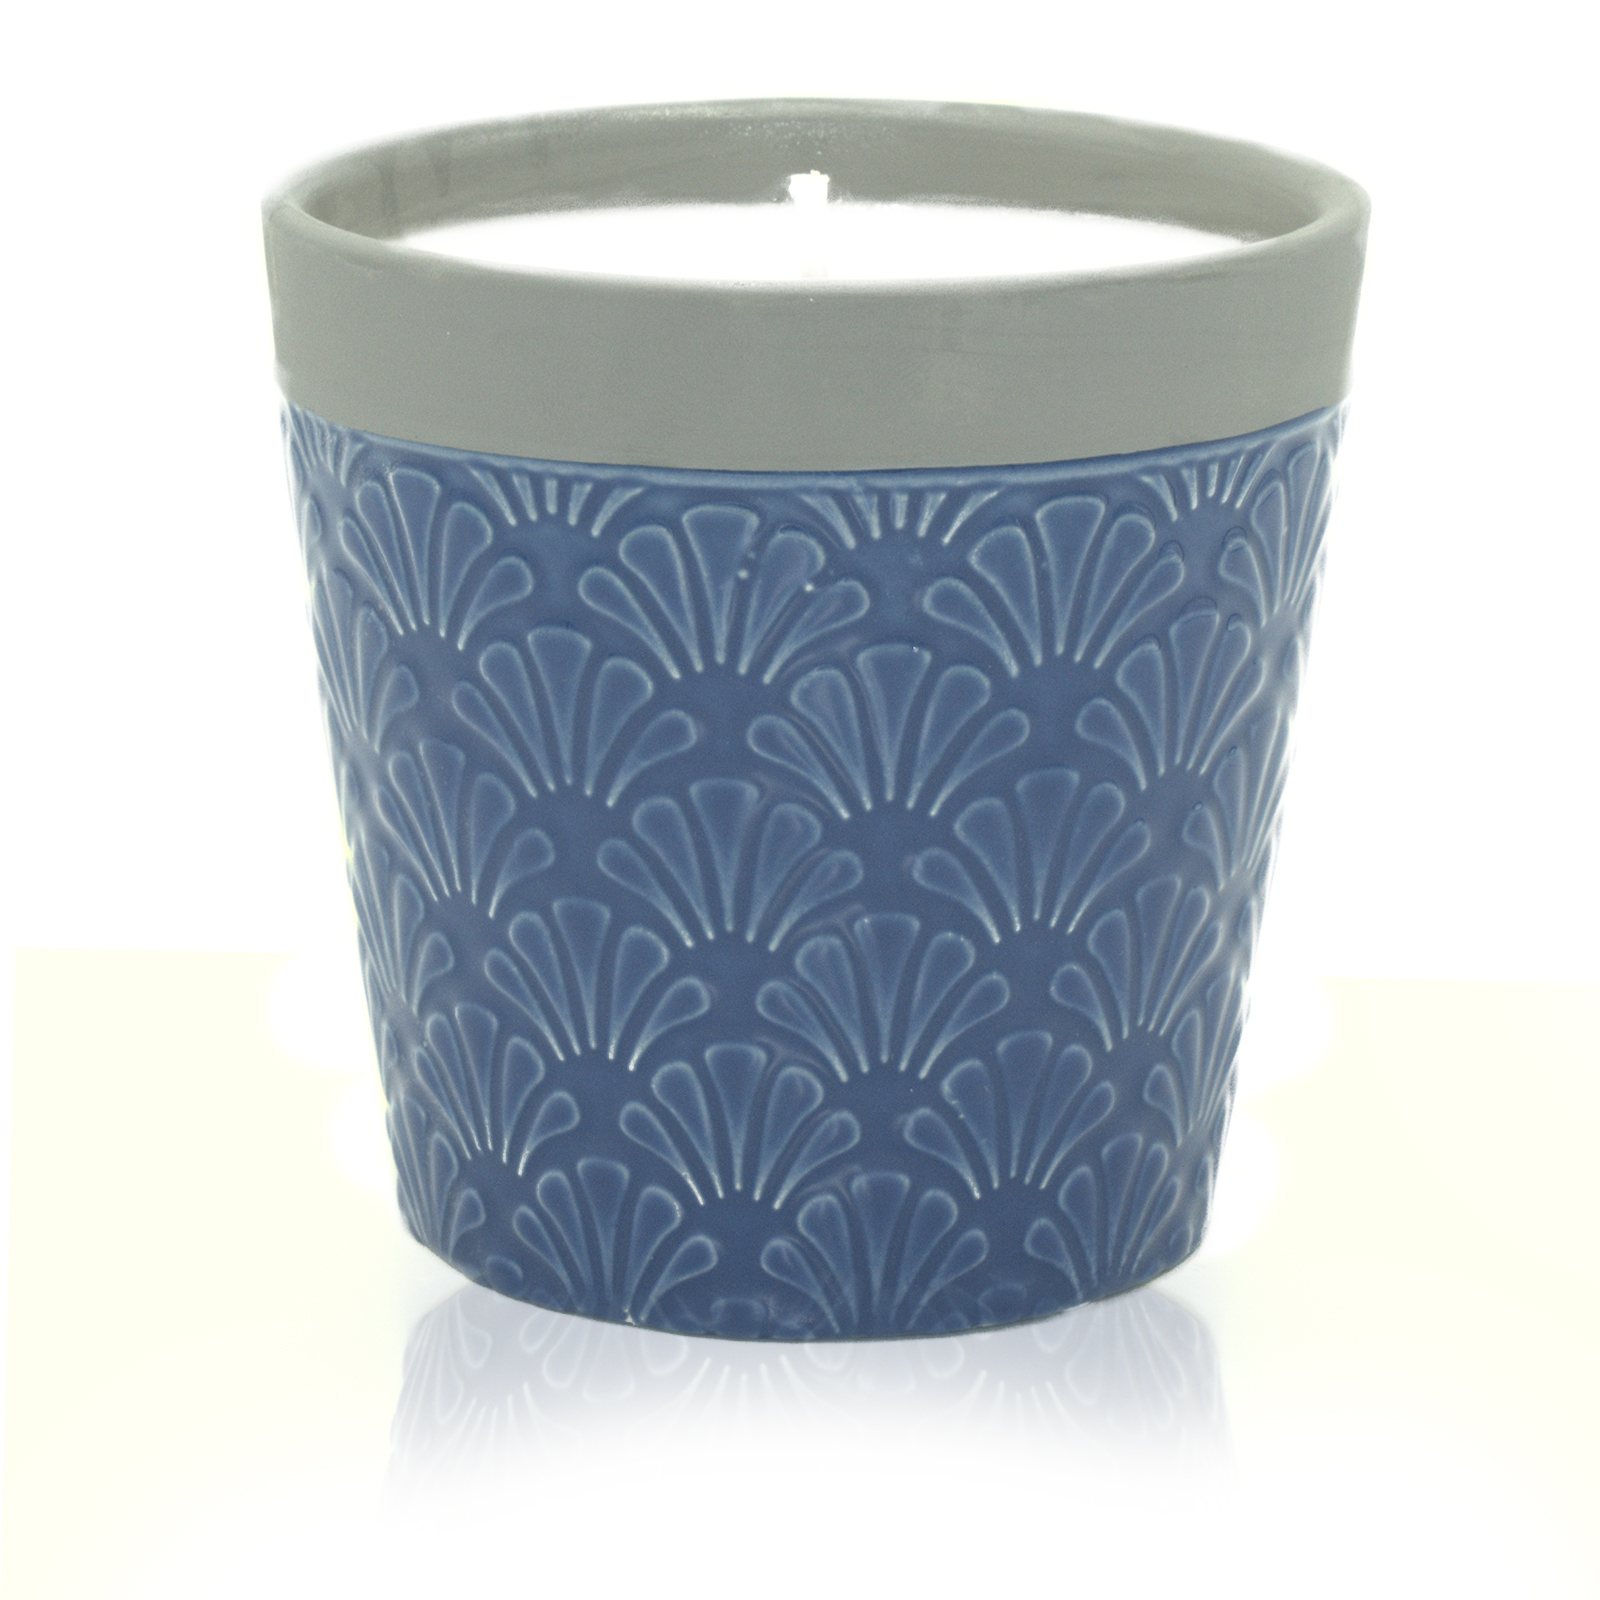 Home is Home Candle Pots - Blue Day AWHP-04